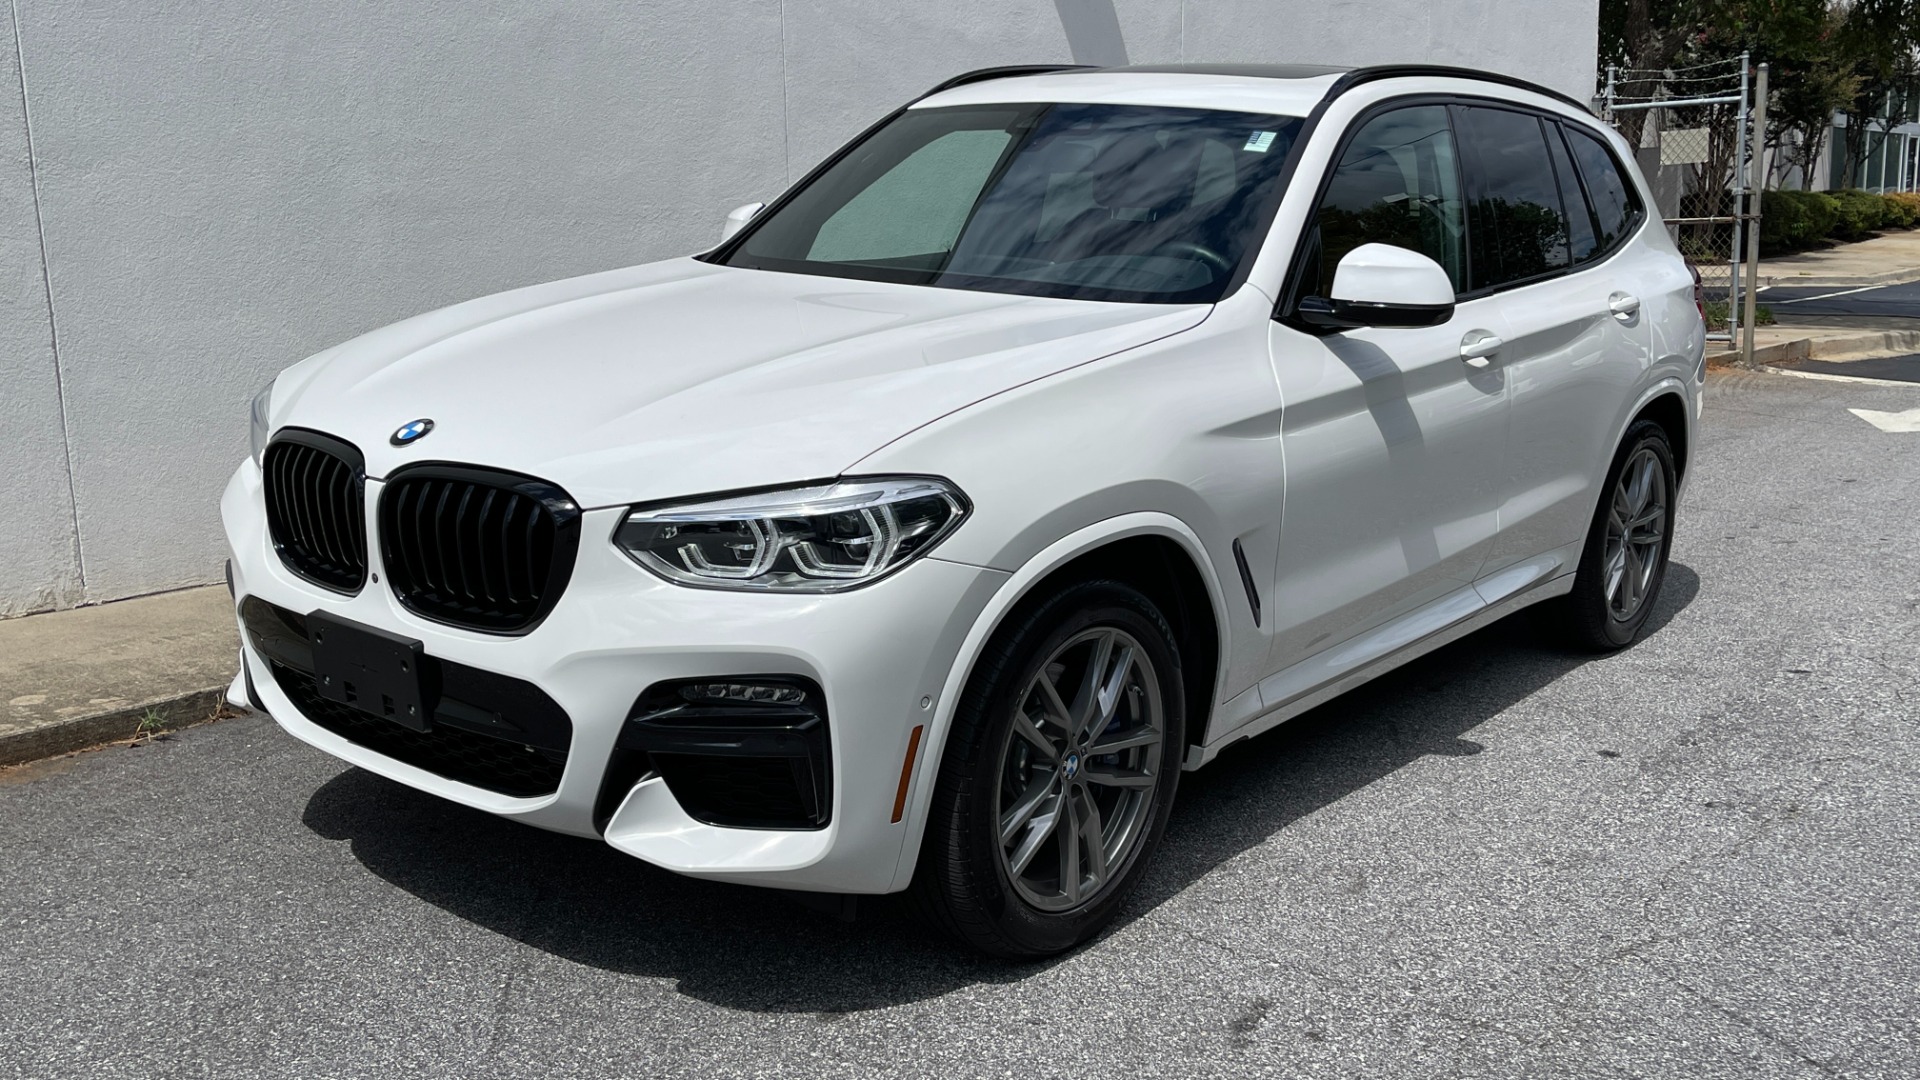 Used 2021 BMW X3 M40i / EXECUTIVE PACKAGE / SHADOWLINE TRIM / HEADS UP DISPLAY / AMBIENT LIG for sale Sold at Formula Imports in Charlotte NC 28227 1